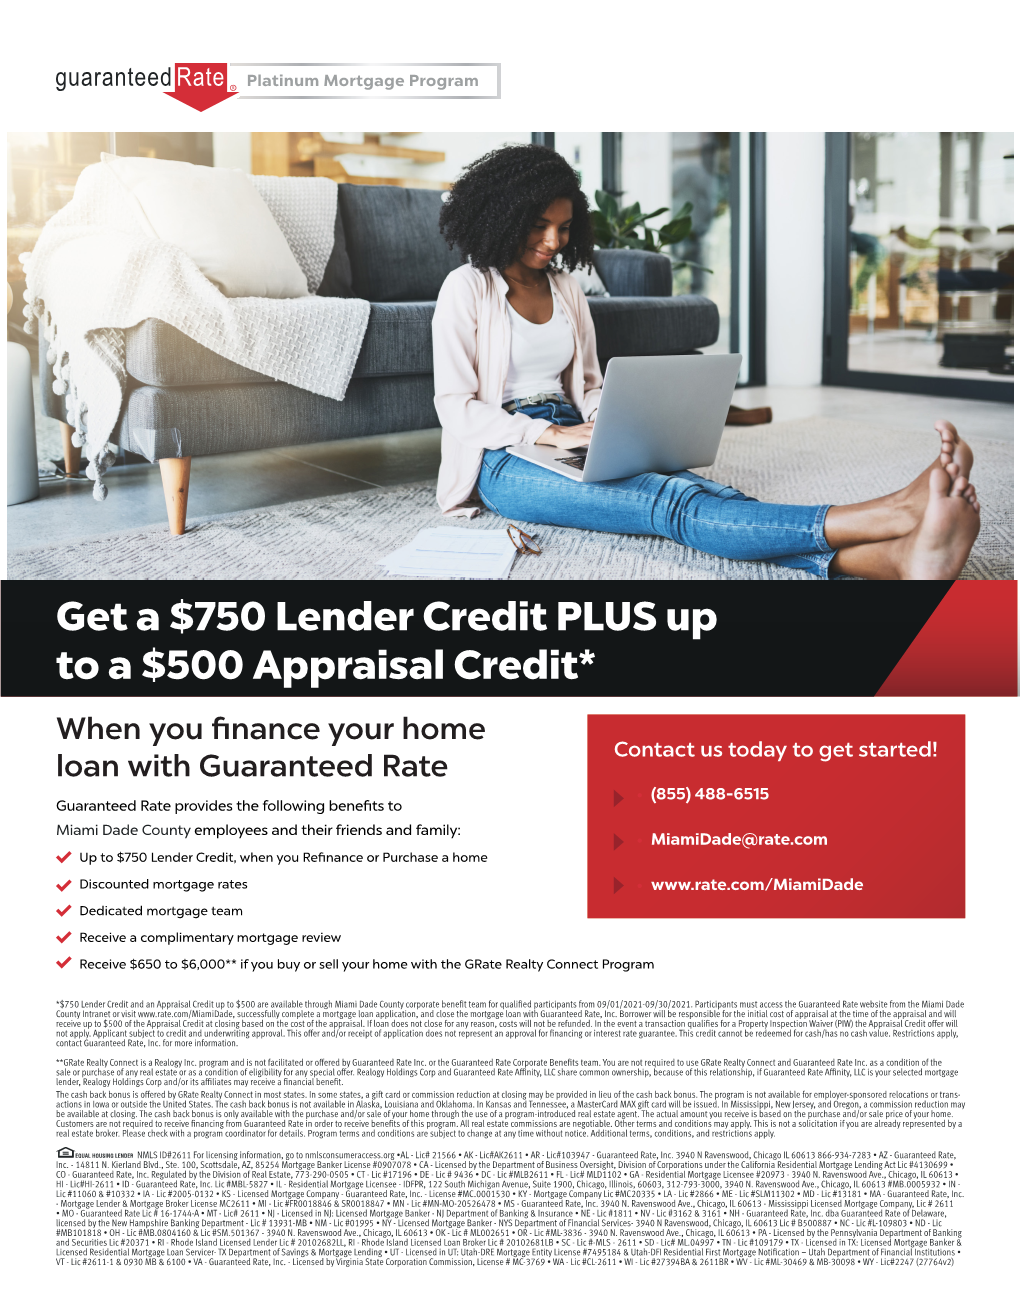 Get a $750 Lender Credit PLUS up to a $500 Appraisal Credit*